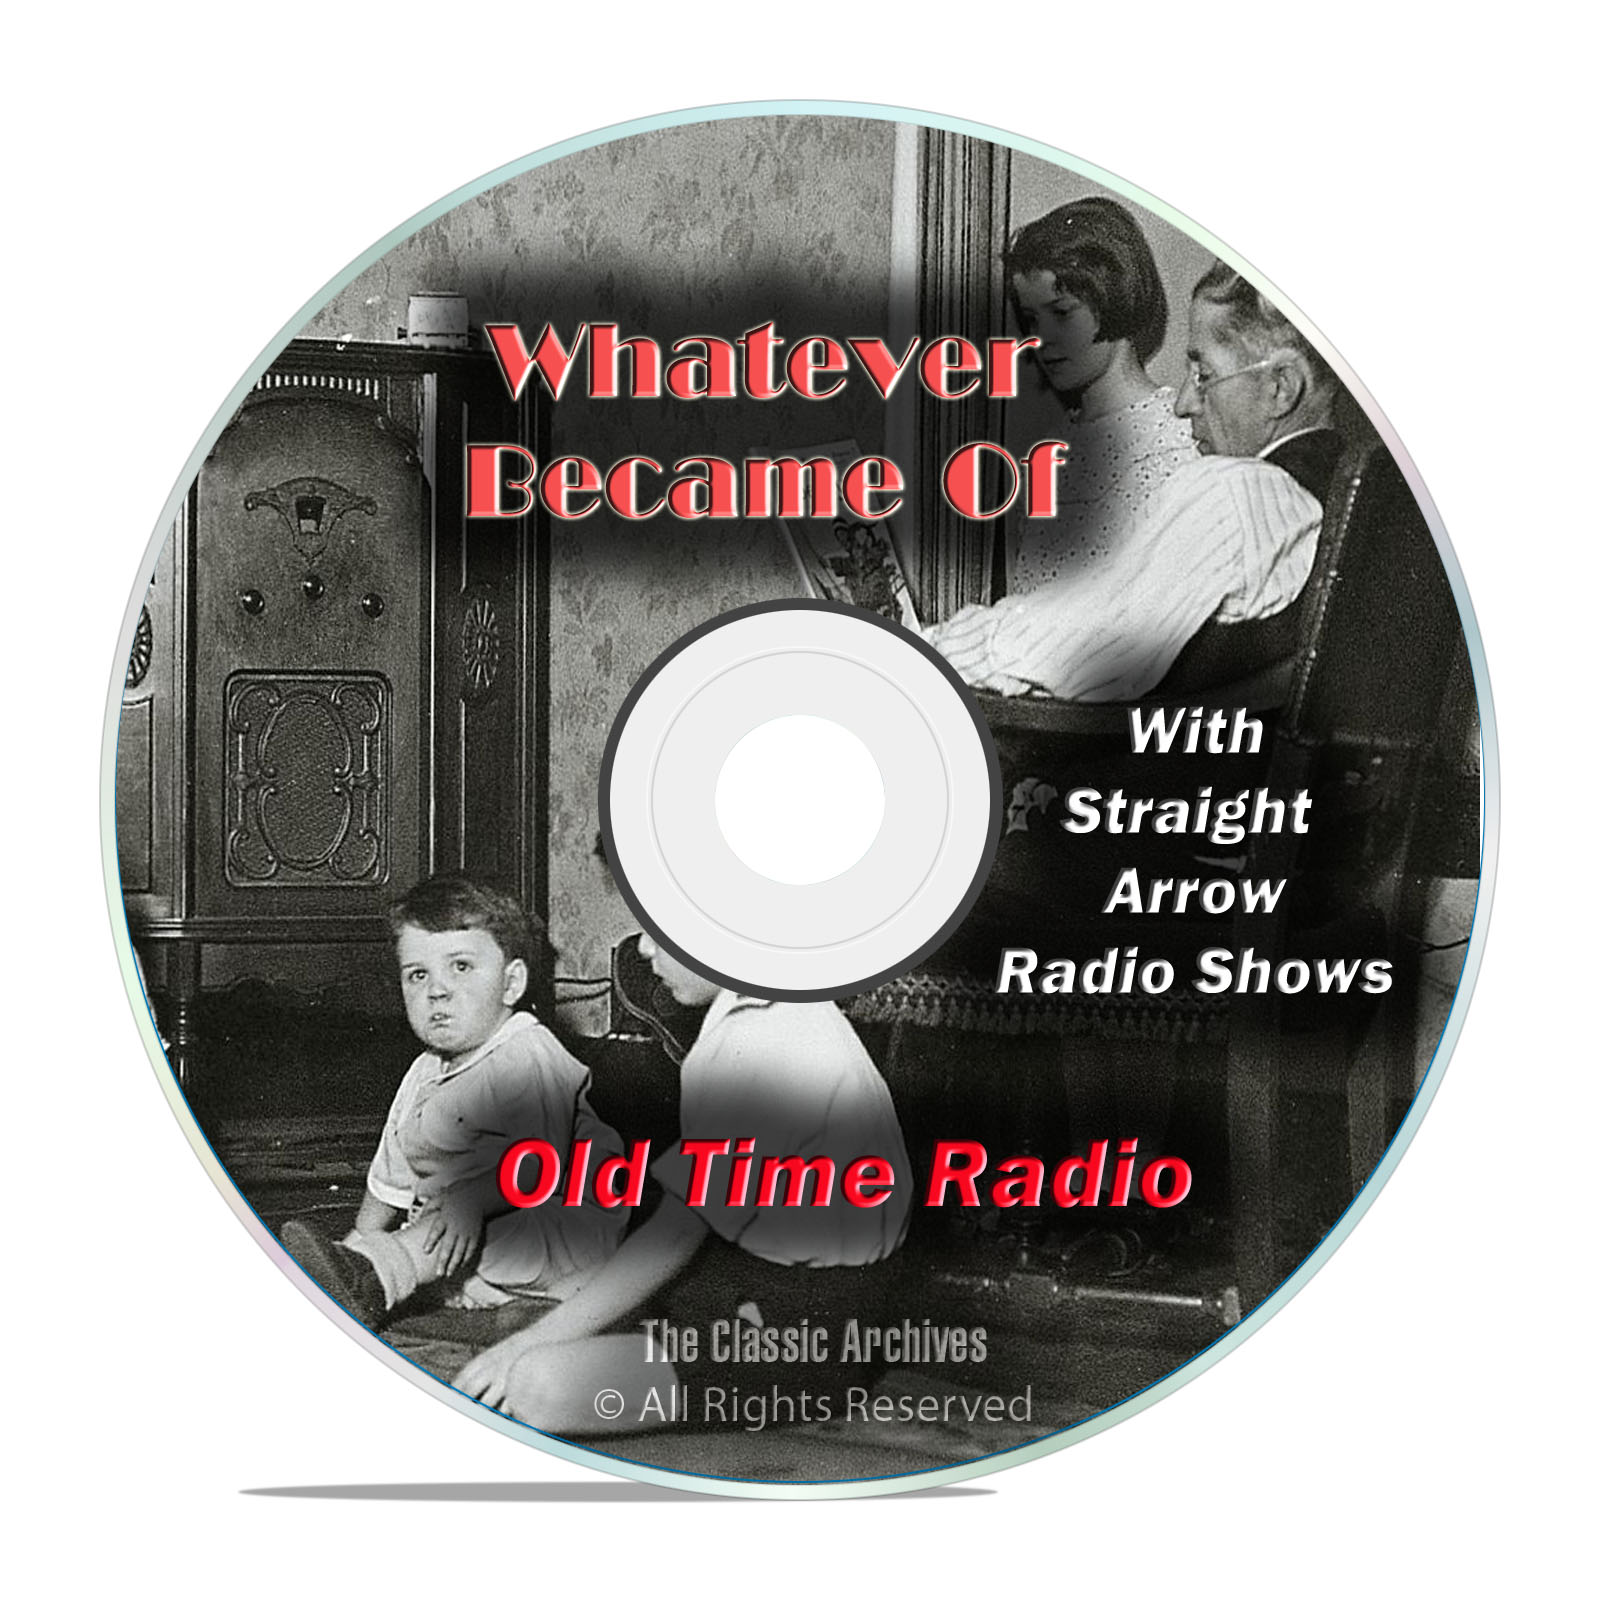 Whatever Became Of, 1,074 Classic Old Time Radio Shows, OTR mp3 DVD